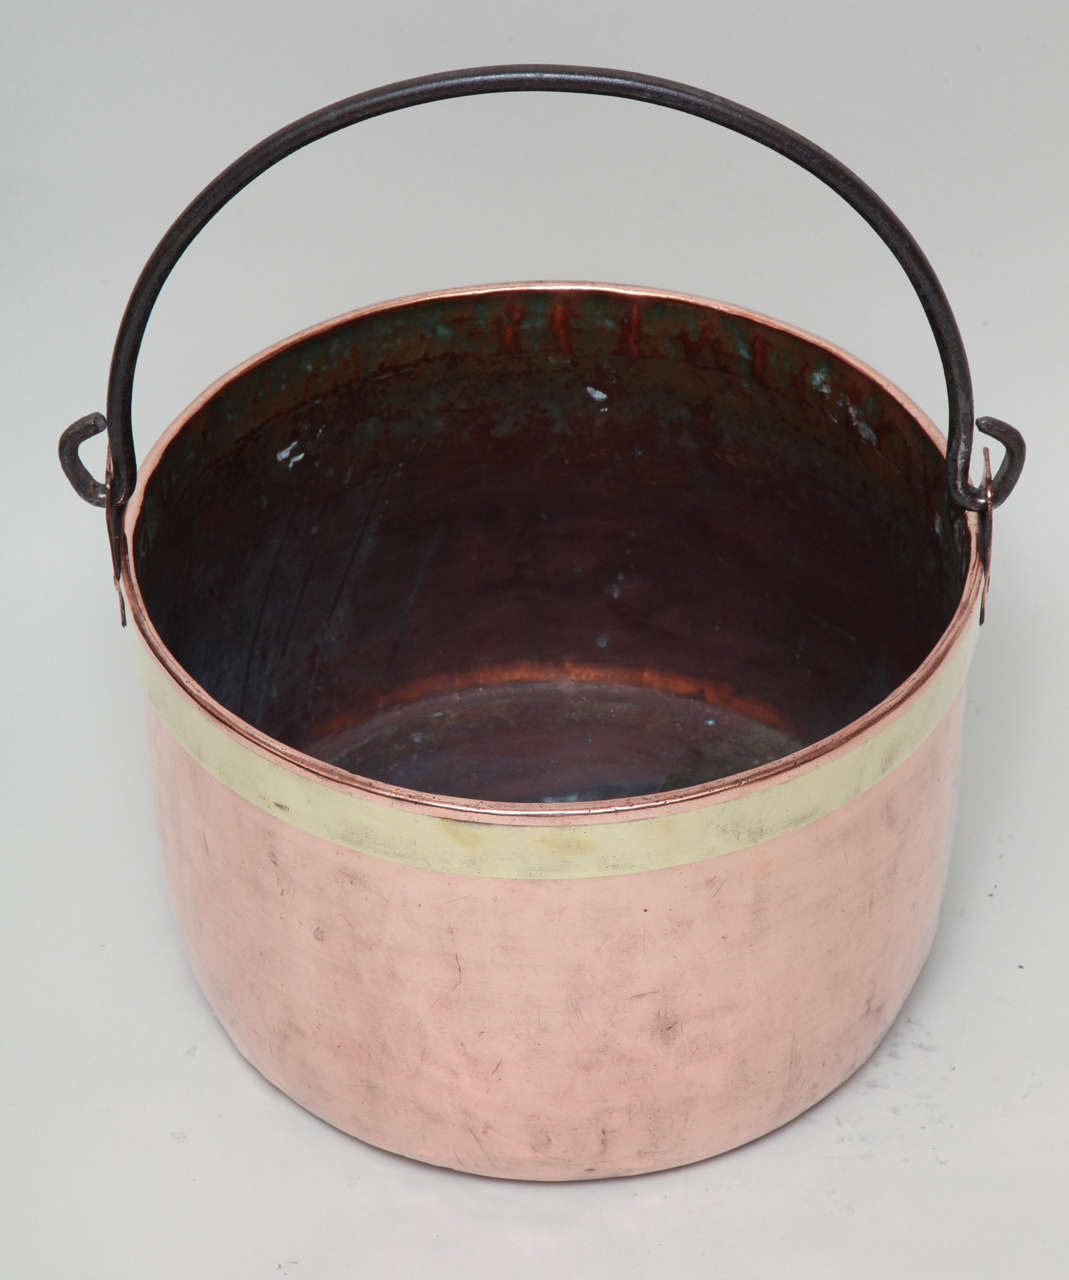 Mid-19th century copper bucket with wrought iron loop handle and brass banding, hand-hammered surface and nicely polished. 

Log holder, planter and firewood container.